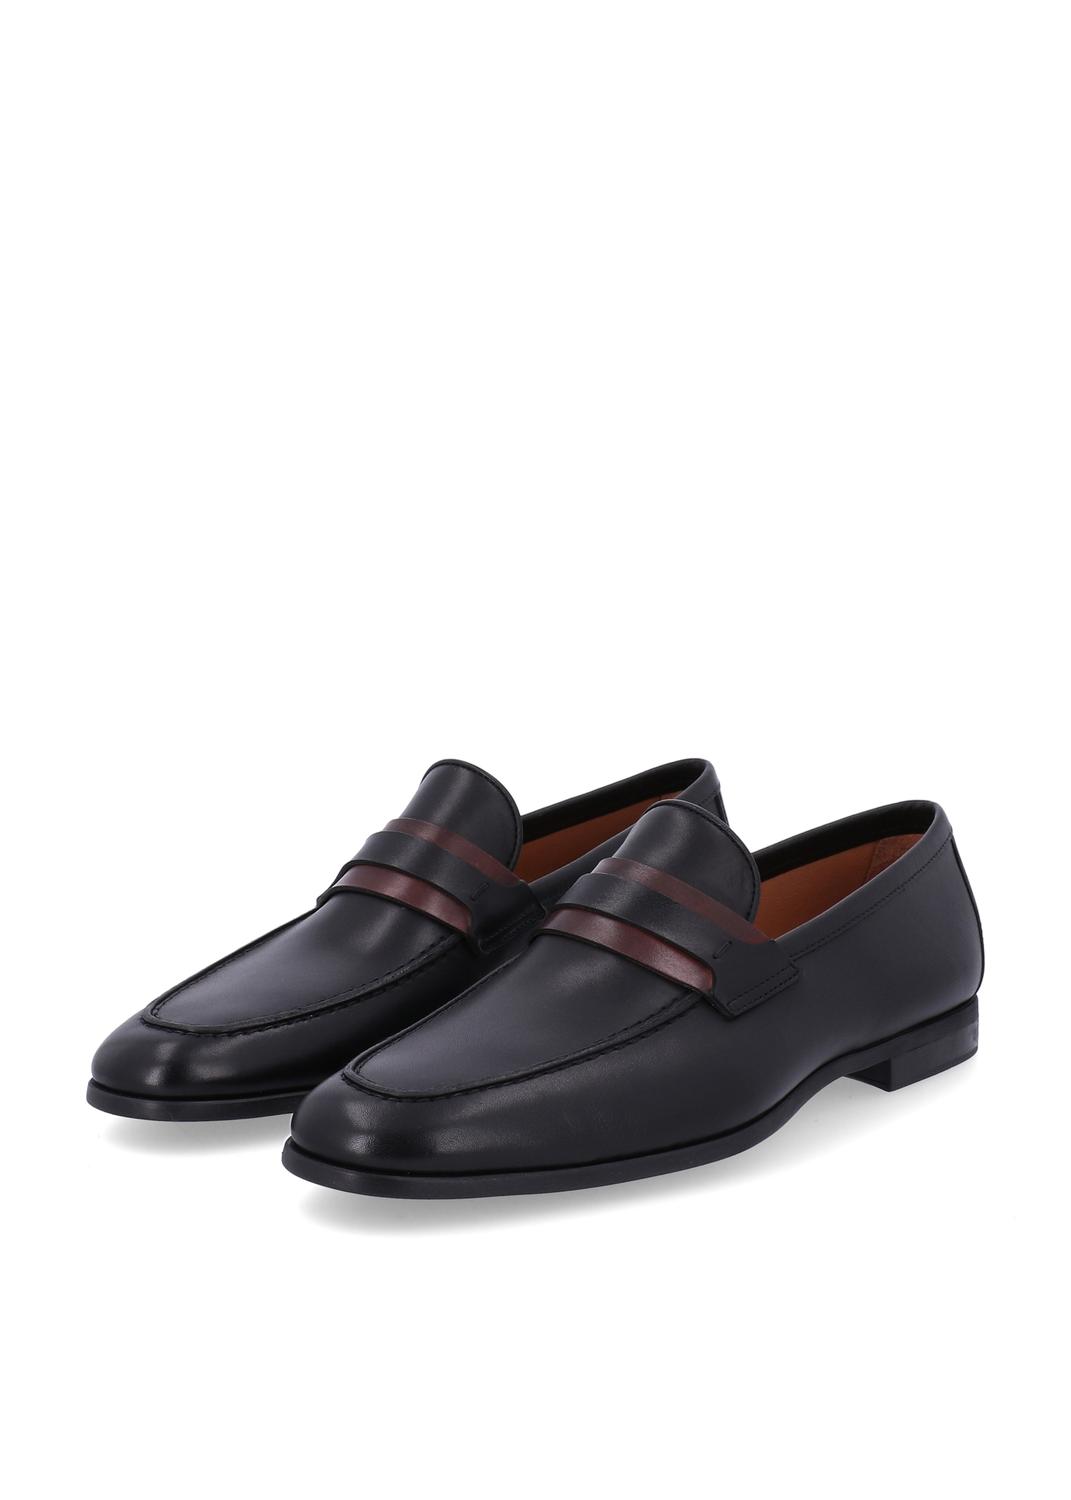 Magnanni loafers Daniel MGN-23822